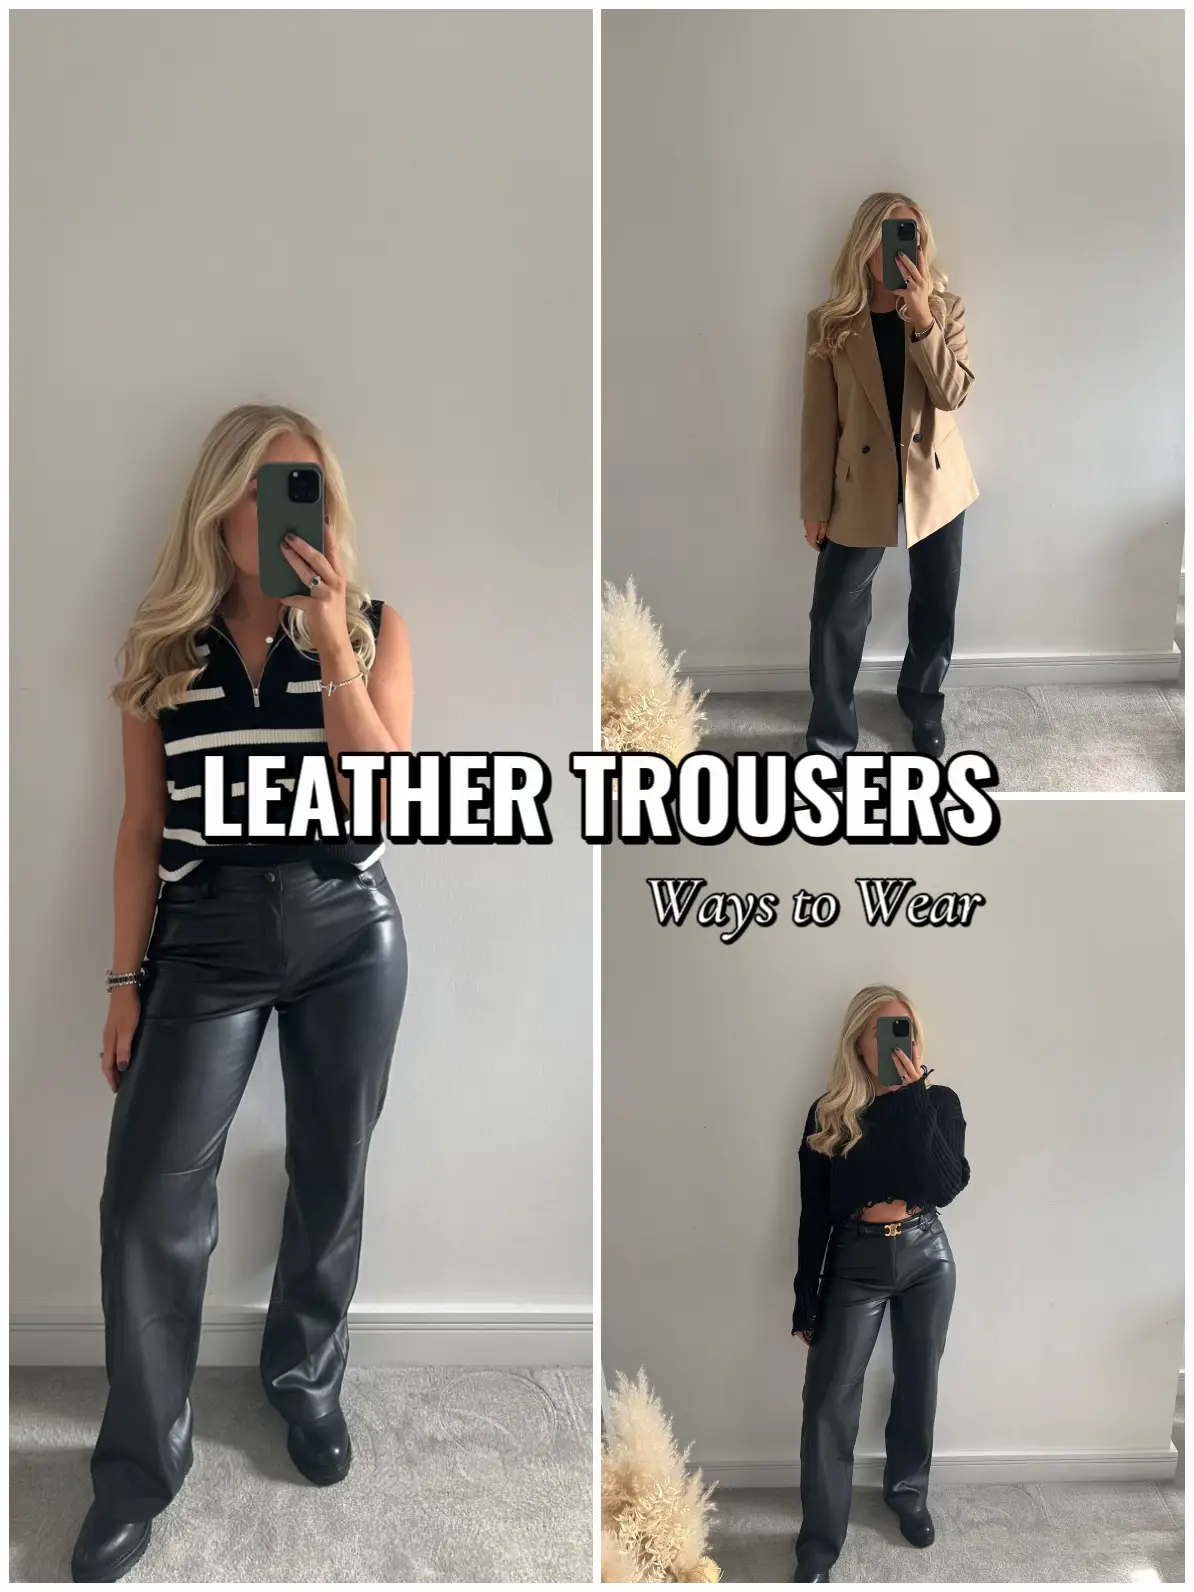 Styling leather trousers, Gallery posted by Kavveeta